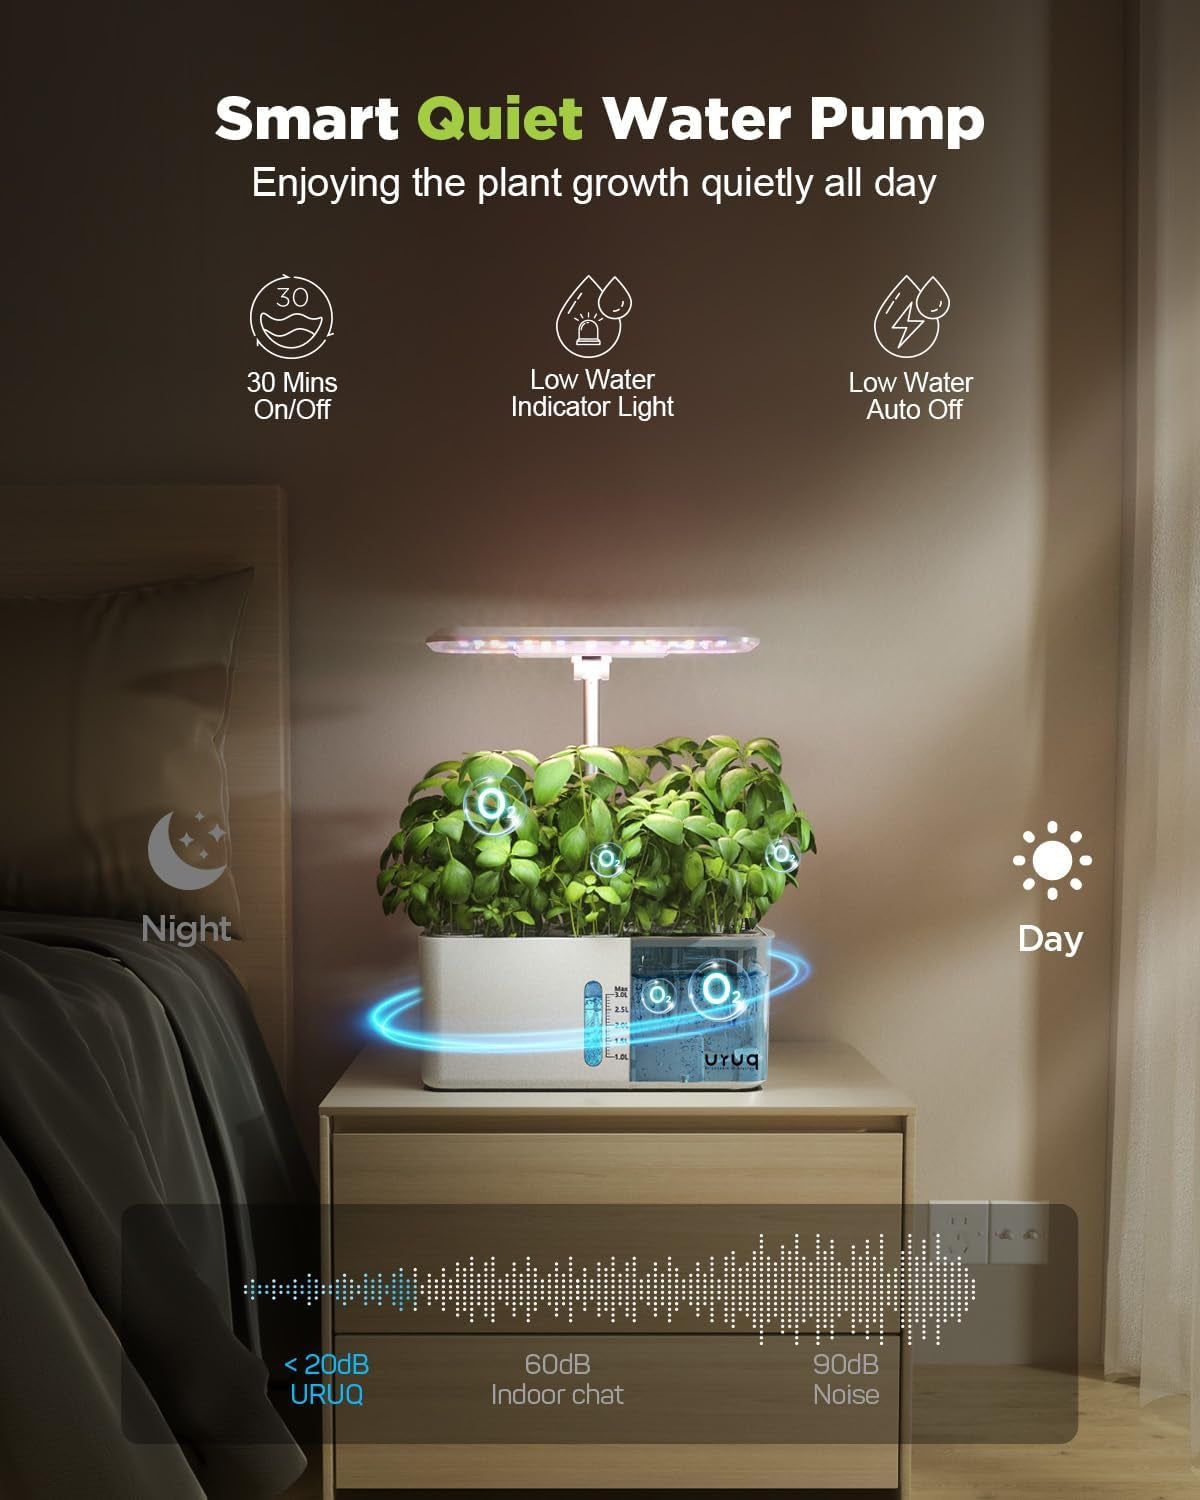 Hydroponics Growing System Indoor Garden: 8 Pods Herb Garden Kit Indoor with LED Grow Light Quiet Smart Water Pump Automatic Timer Healthy Fresh Herbs Vegetables - Hydroponic Planter for Home Kitchen